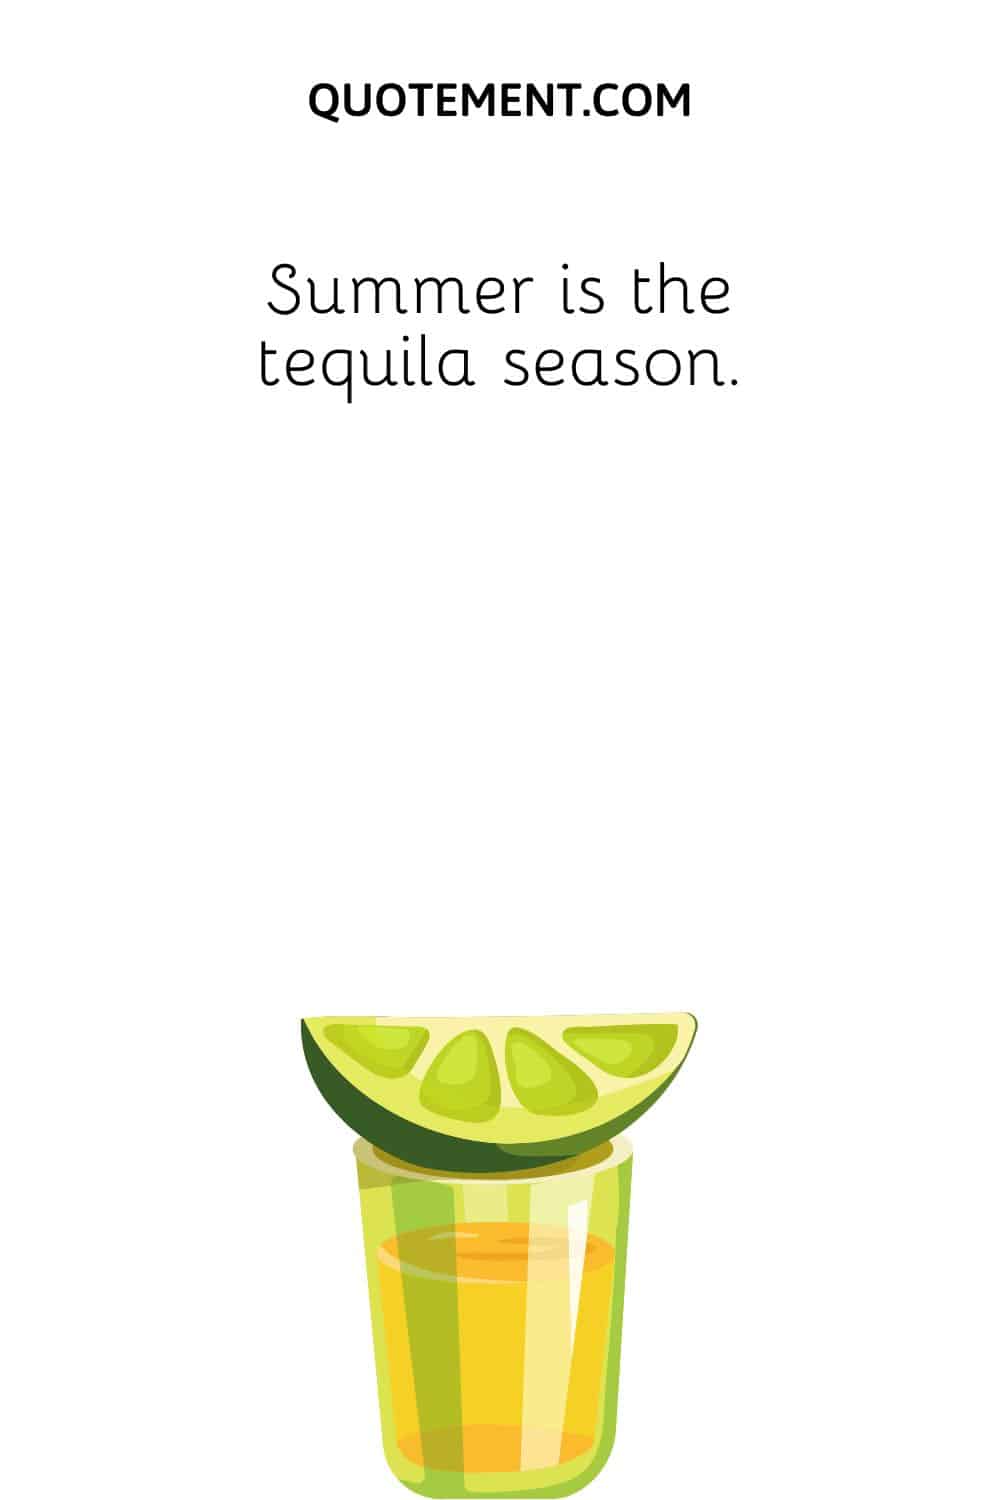 Summer is the tequila season